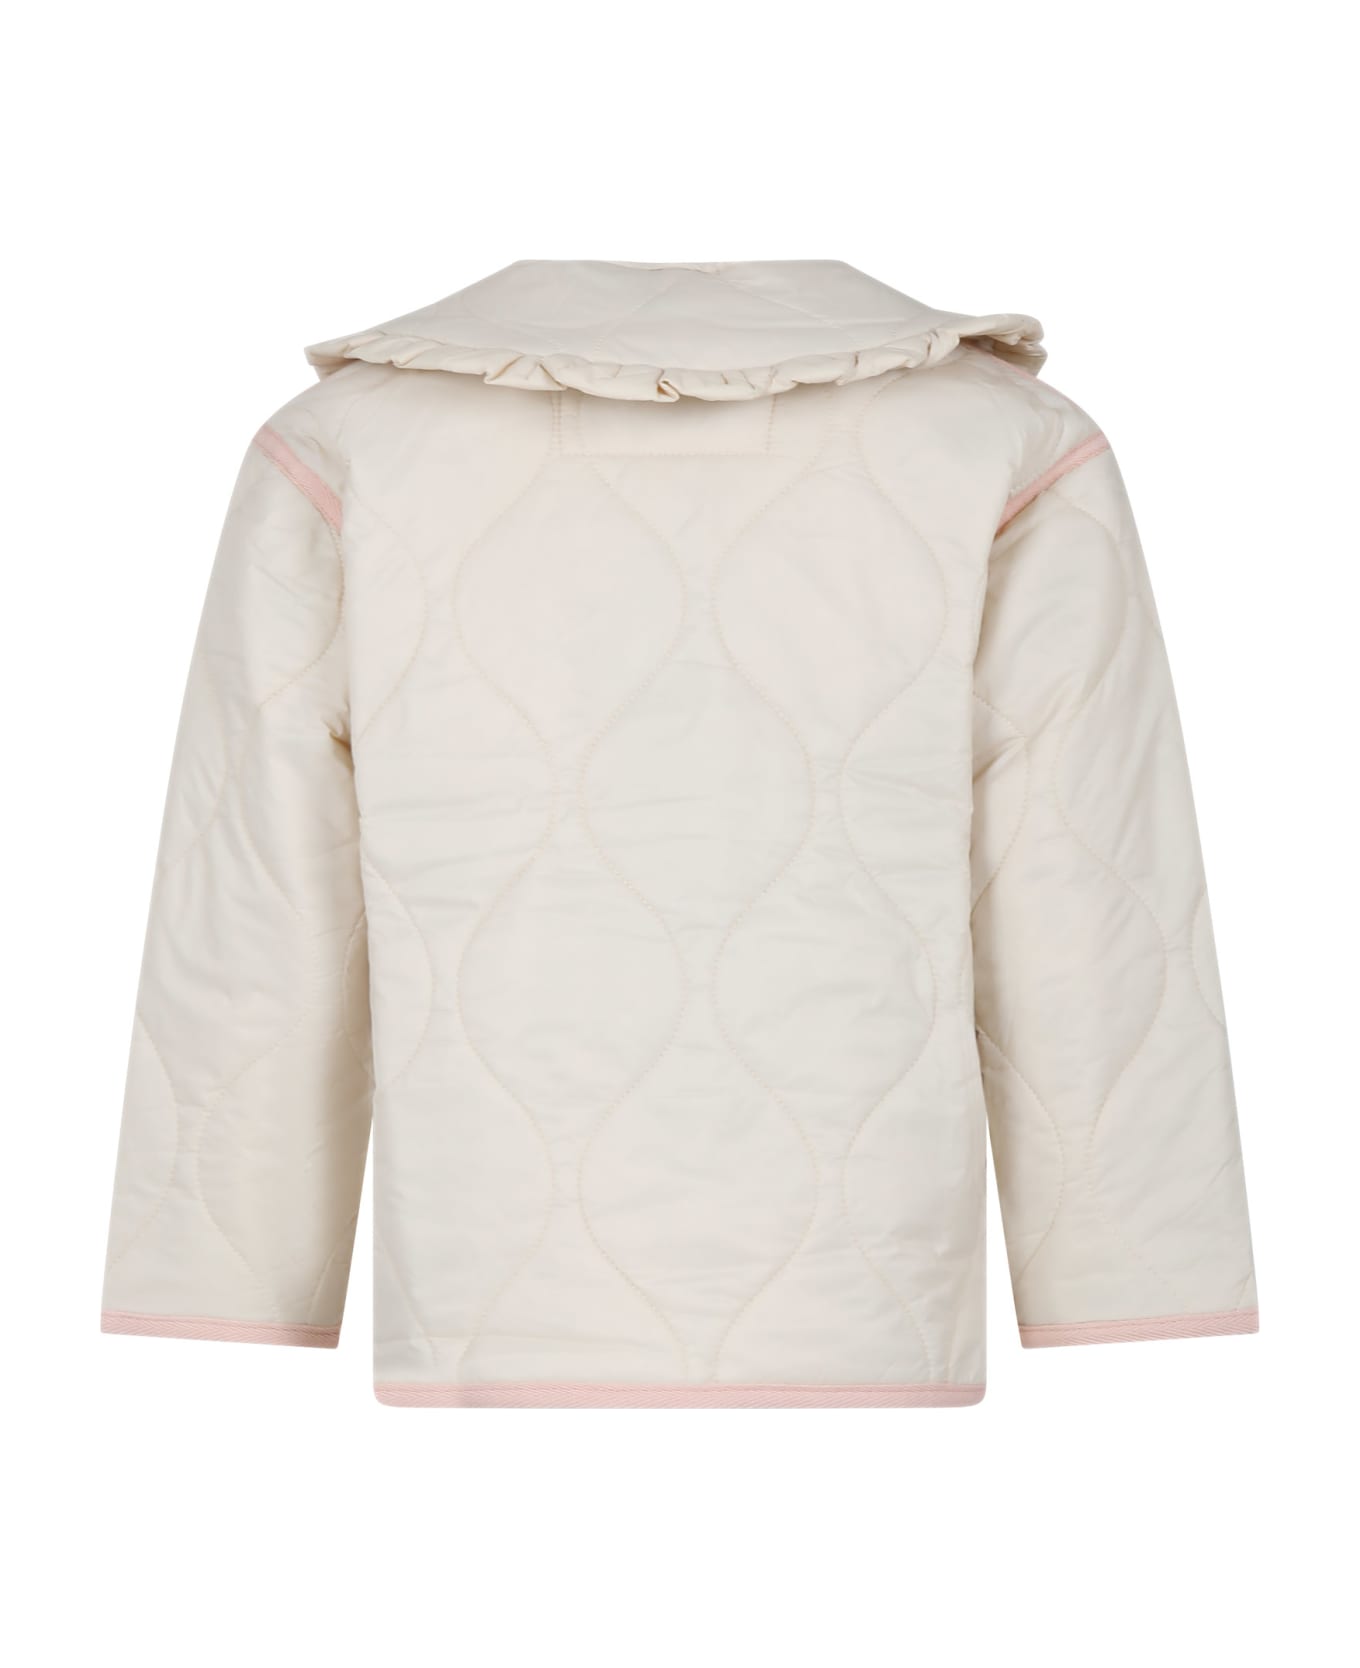 Molo Ivory Down Jacket For Girl - Ivory